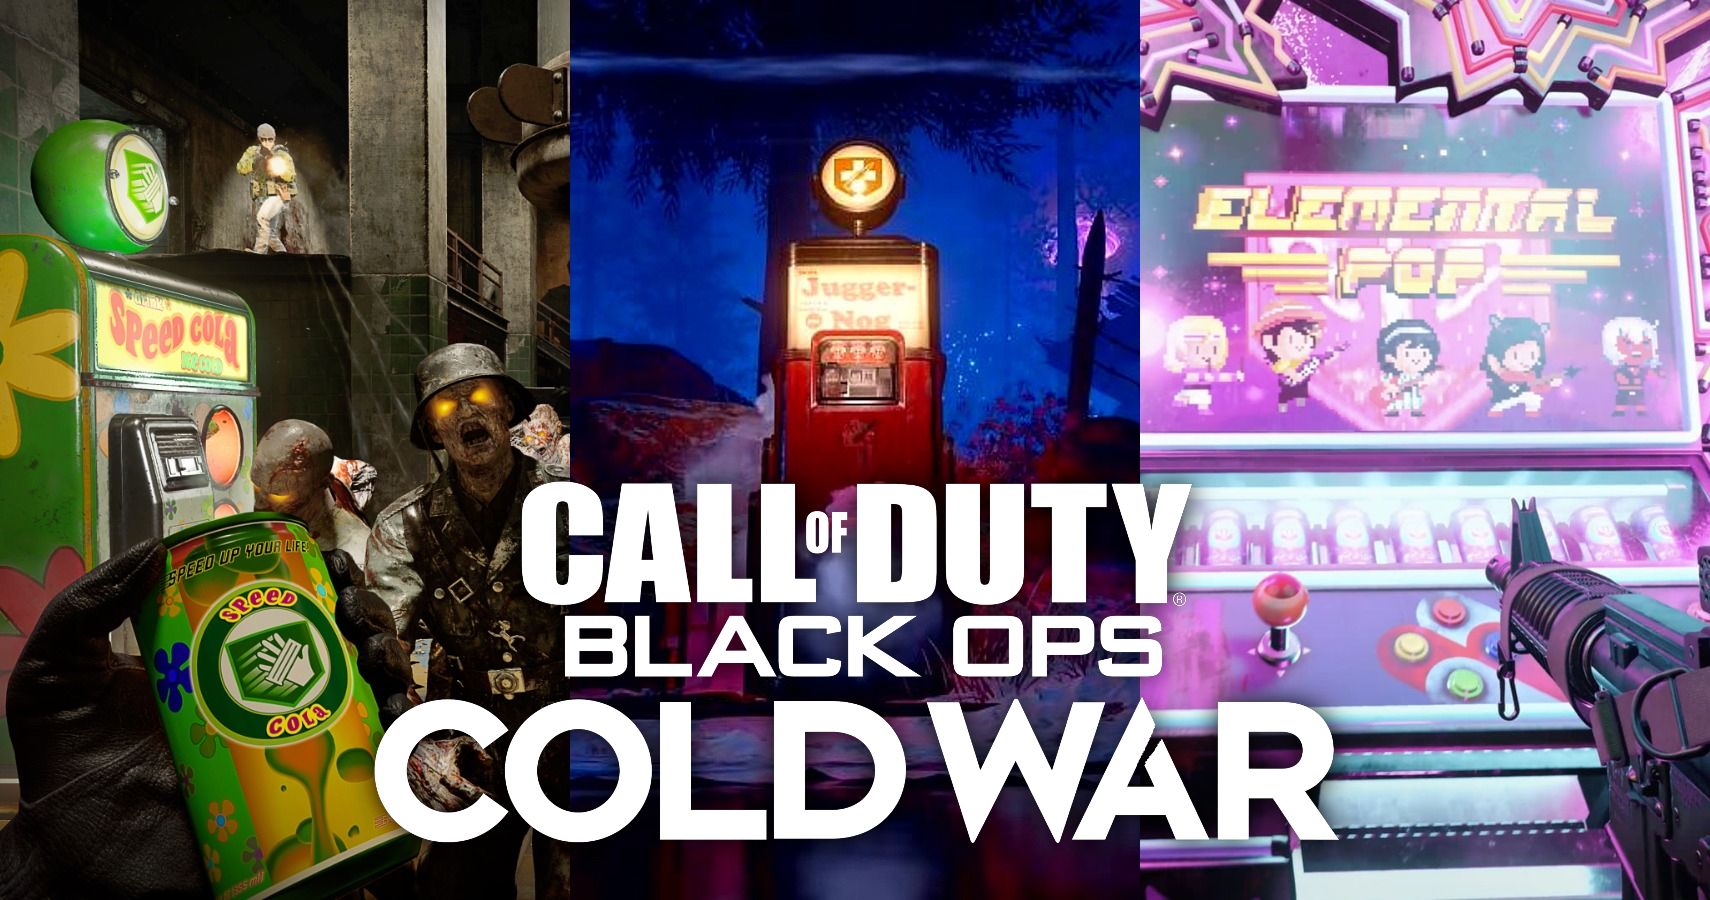 call of duty black ops cold war zombies leak